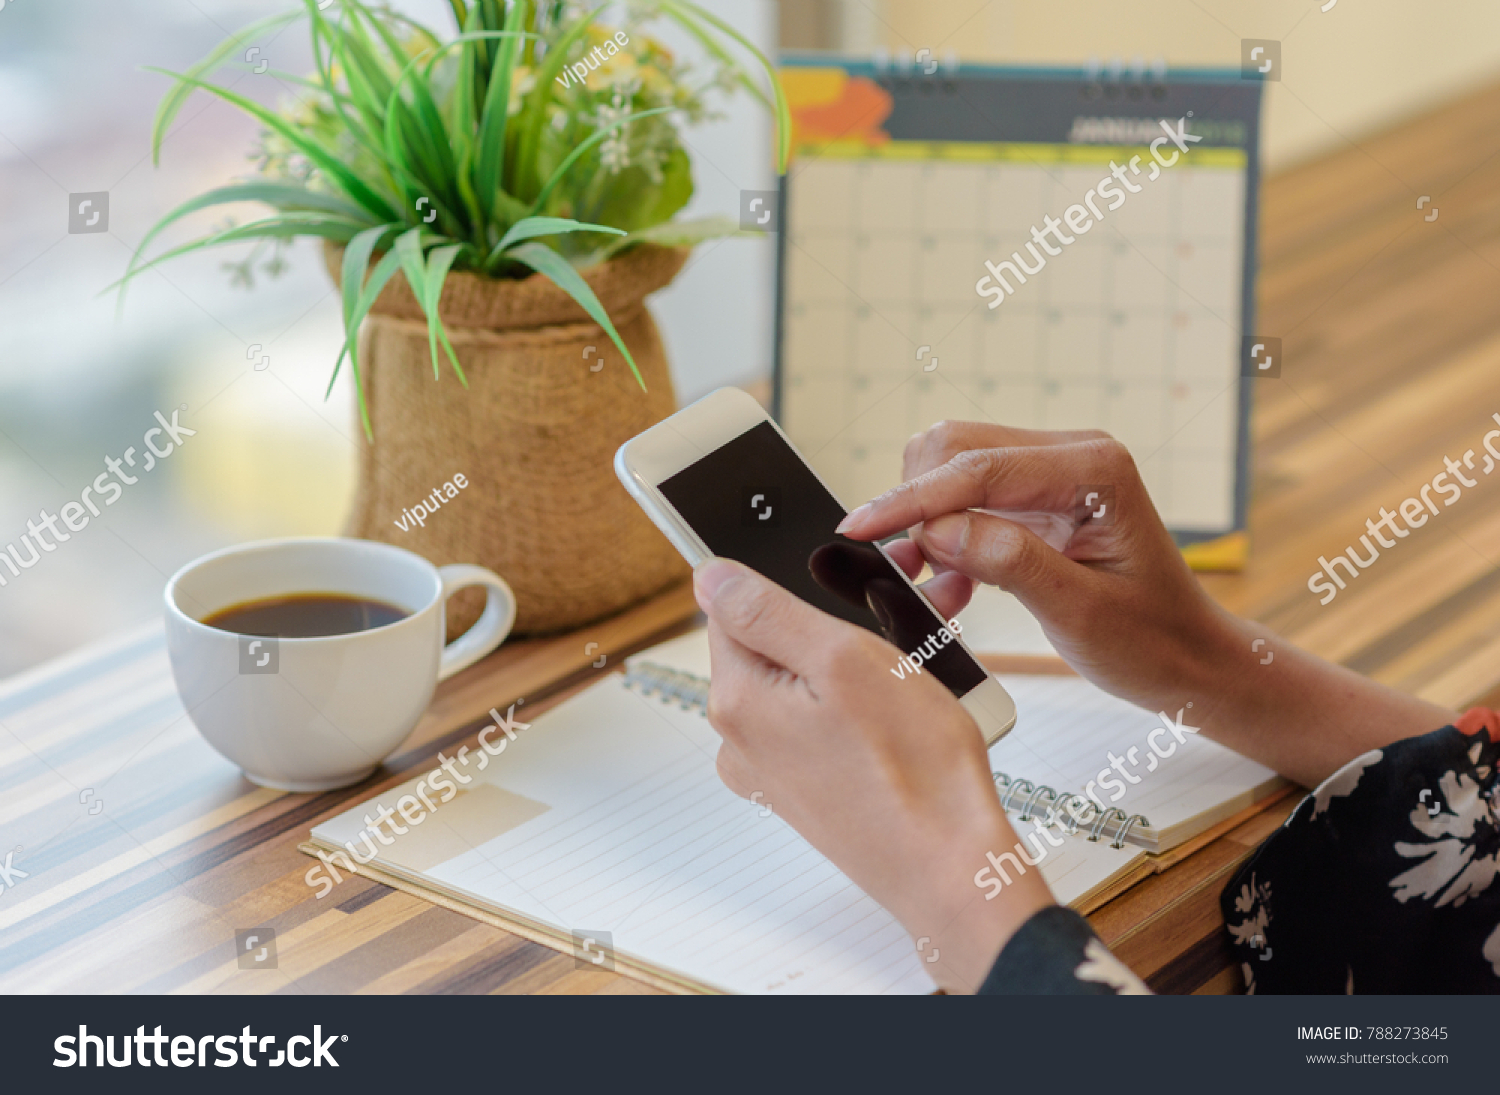 Woman holding smartphone to update calendar with notebook pencil diary vase on table with blurred calendar. planning scheduling agenda and event for 2018. Calendar and Planning concept. #788273845